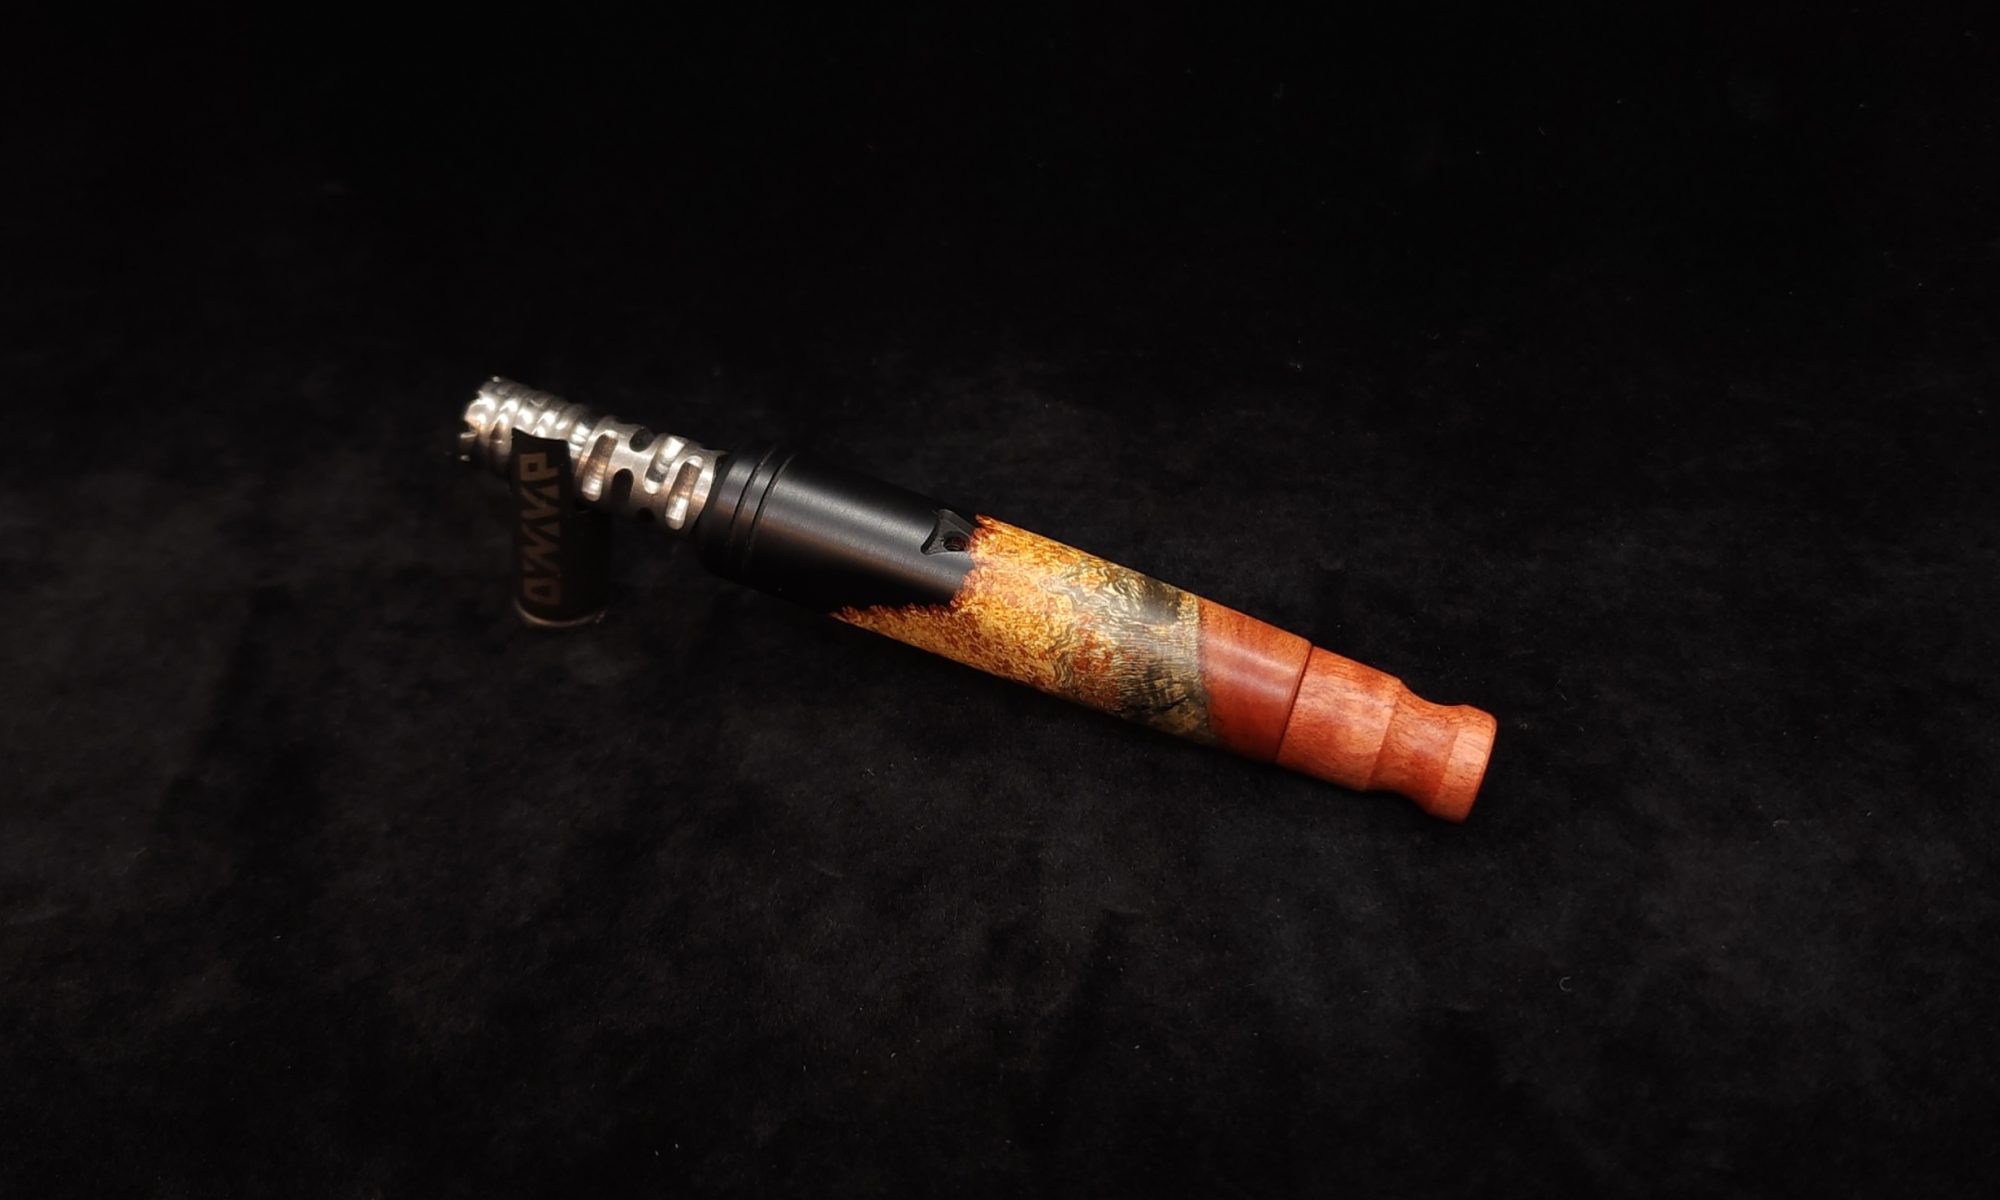 This image portrays Taper Gripped Dynavap Briar Burl Hybrid Stem + Matched Mouthpiece by Dovetail Woodwork.